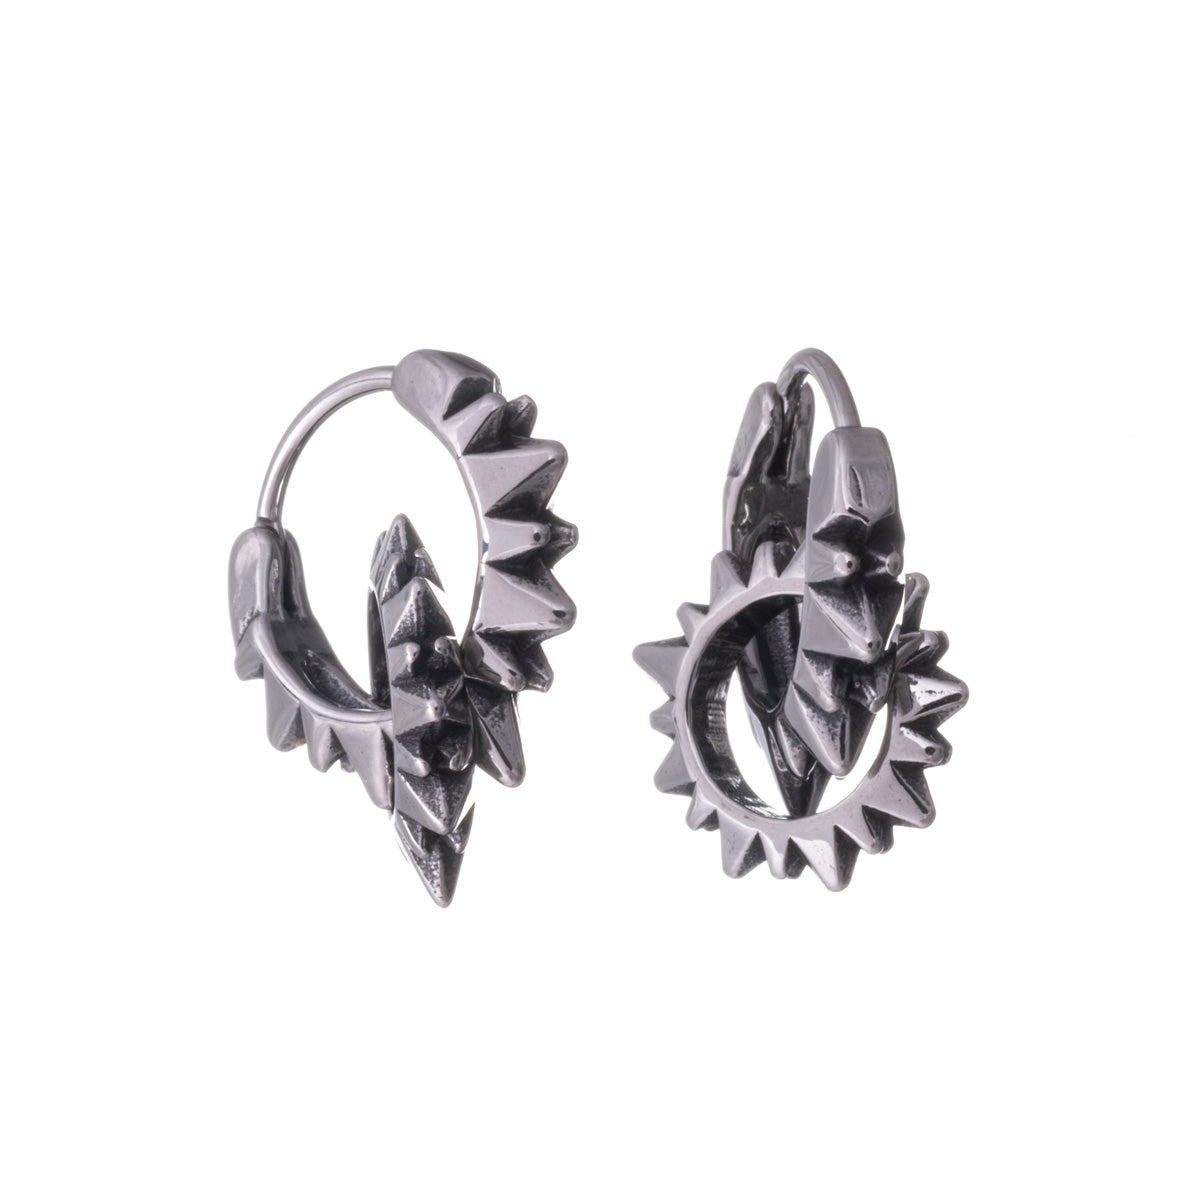 Spiked earrings with spiked ring pendant (Steel 316L)